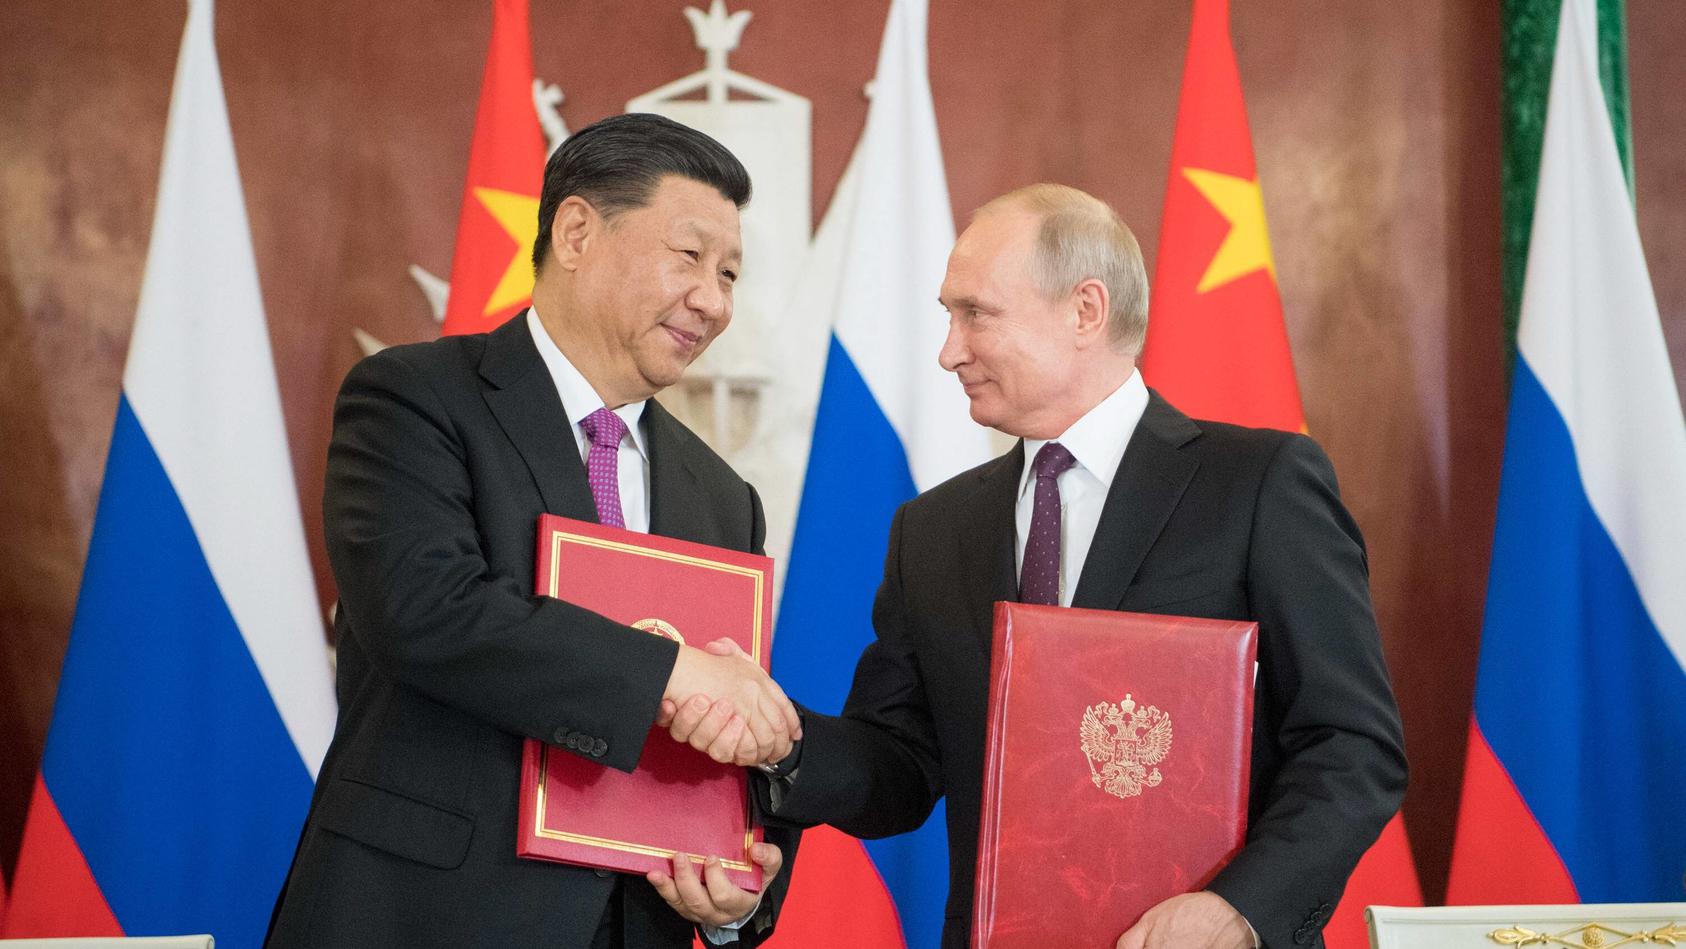 (190605) -- MOSCOW, June 5, 2019 (Xinhua) -- Chinese President Xi Jinping (L) and his Russian counterpart Vladimir Putin sign the statements on elevating bilateral ties to the comprehensive strategic partnership of coordination for a new era and on s